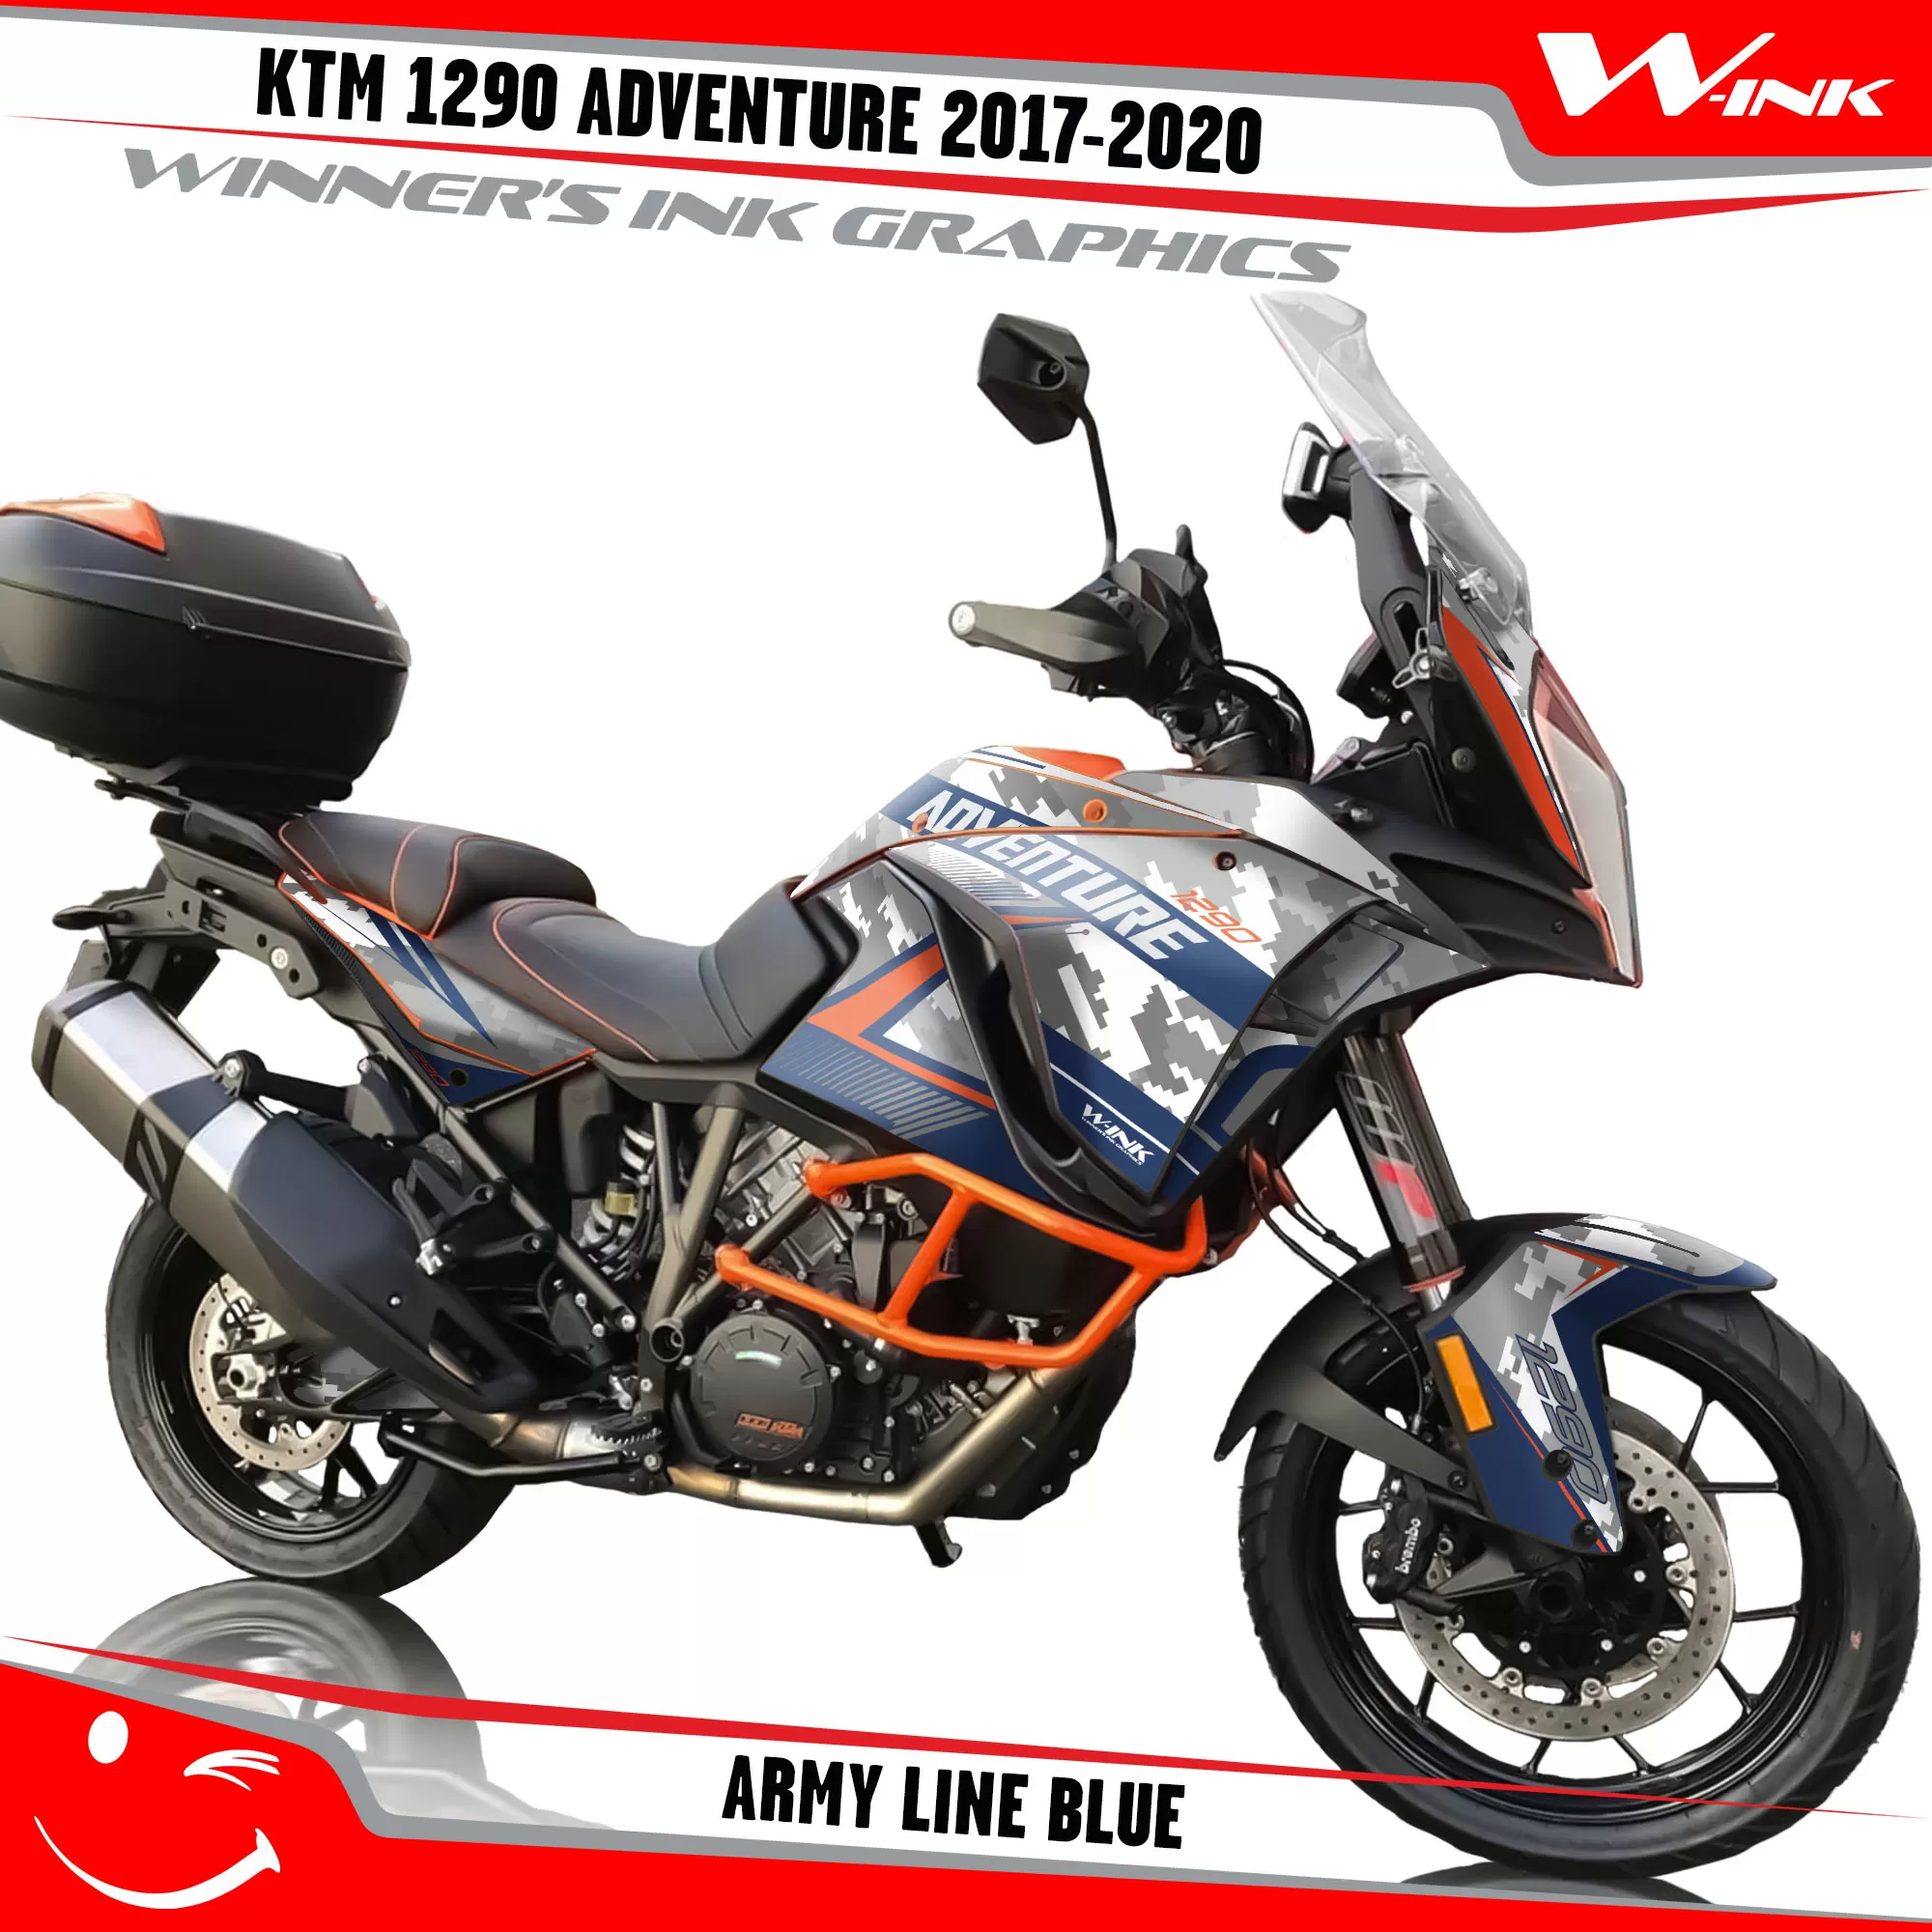 KTM-Adventure-1290-2017-2018-2019-2020-graphics-kit-and-decals-Army-Line-Blue